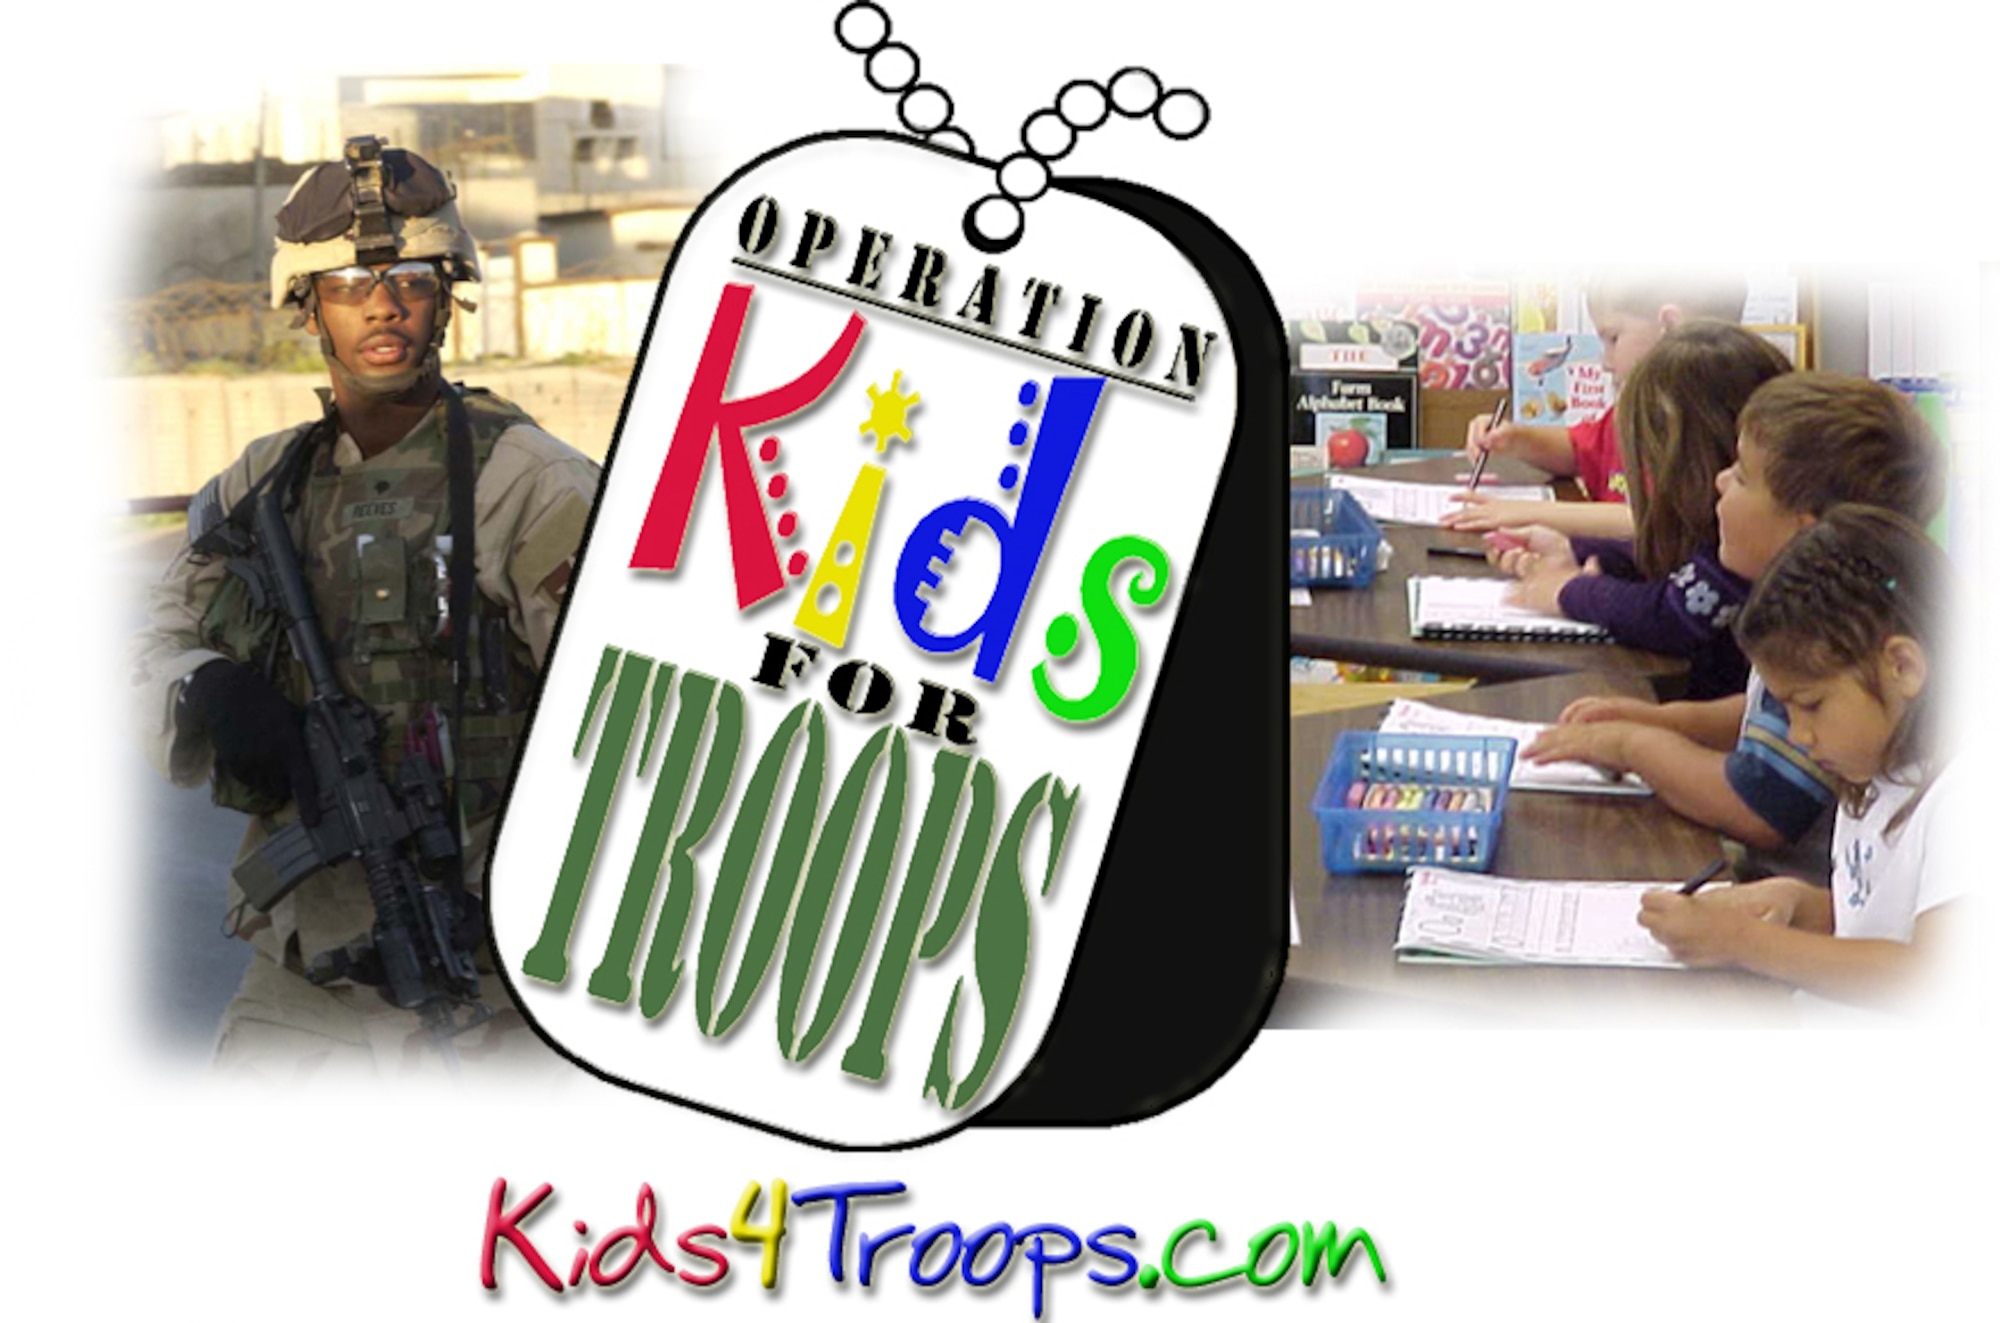 Operation Kids For Troops helps thousands send letters of support to American military personnel serving overseas each year.